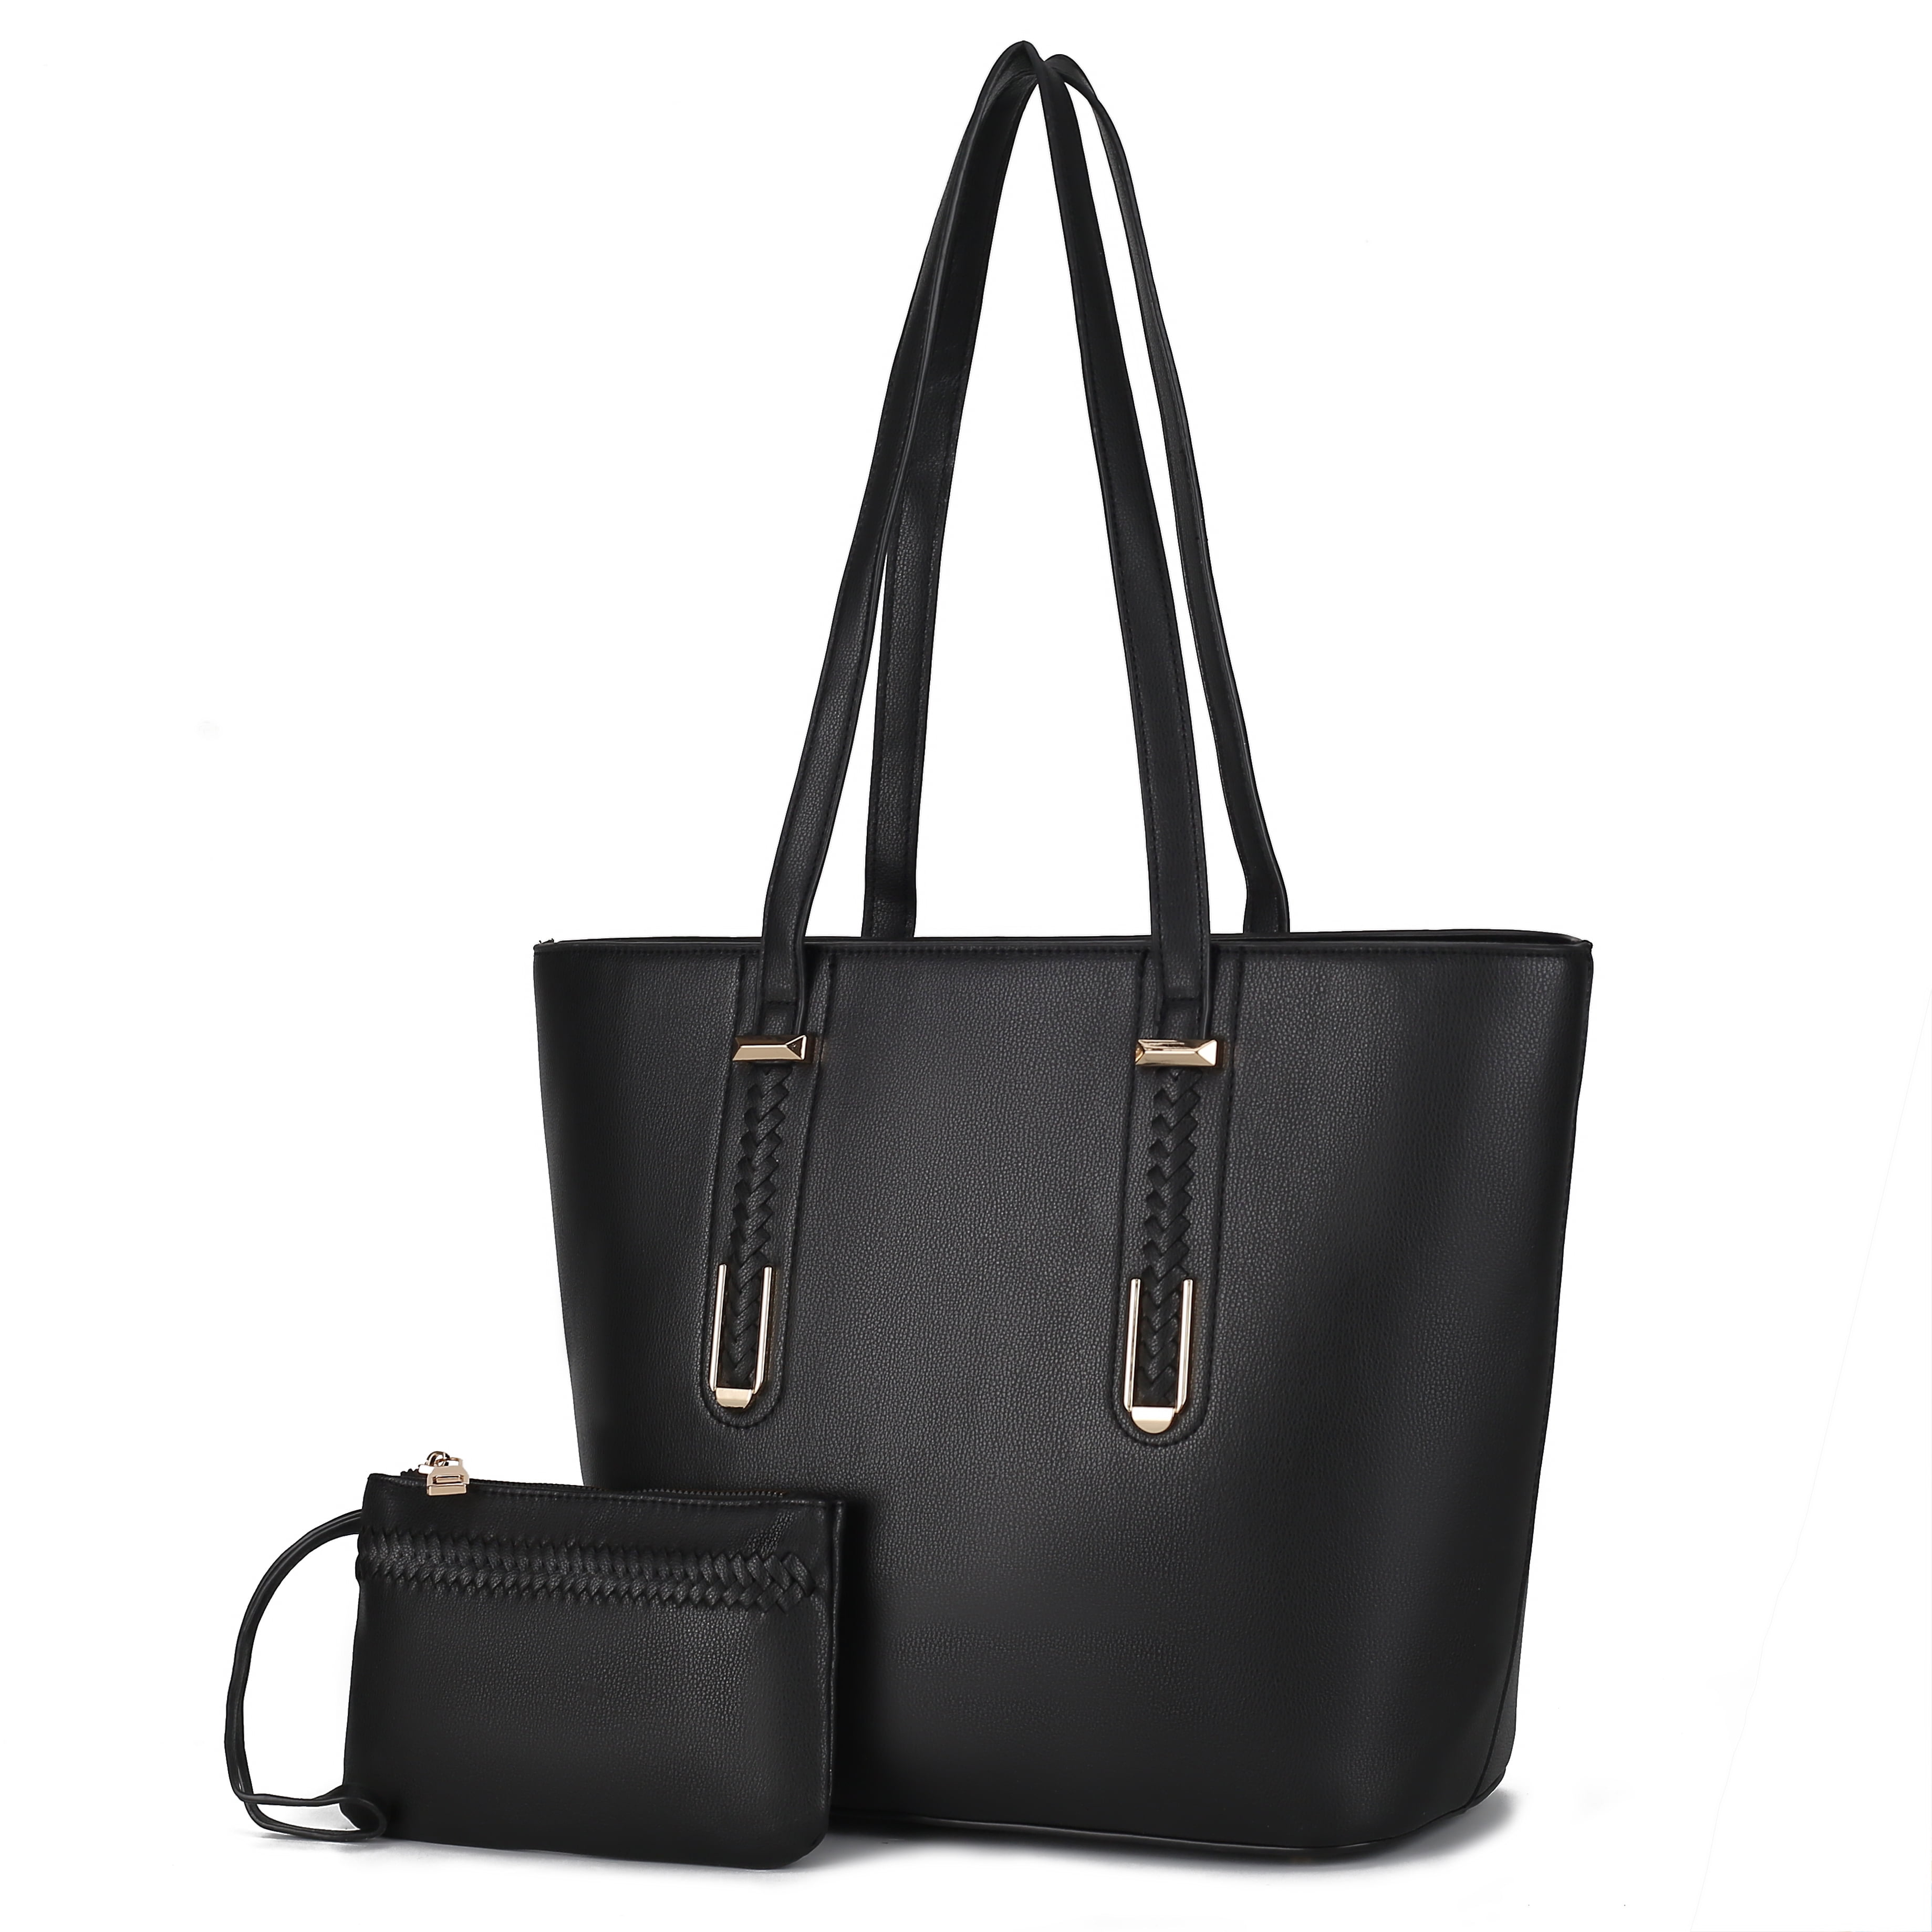 MKF Collection Mina Vegan Leather Women’s Tote Bag by Mia K with Pouch -2 Pieces